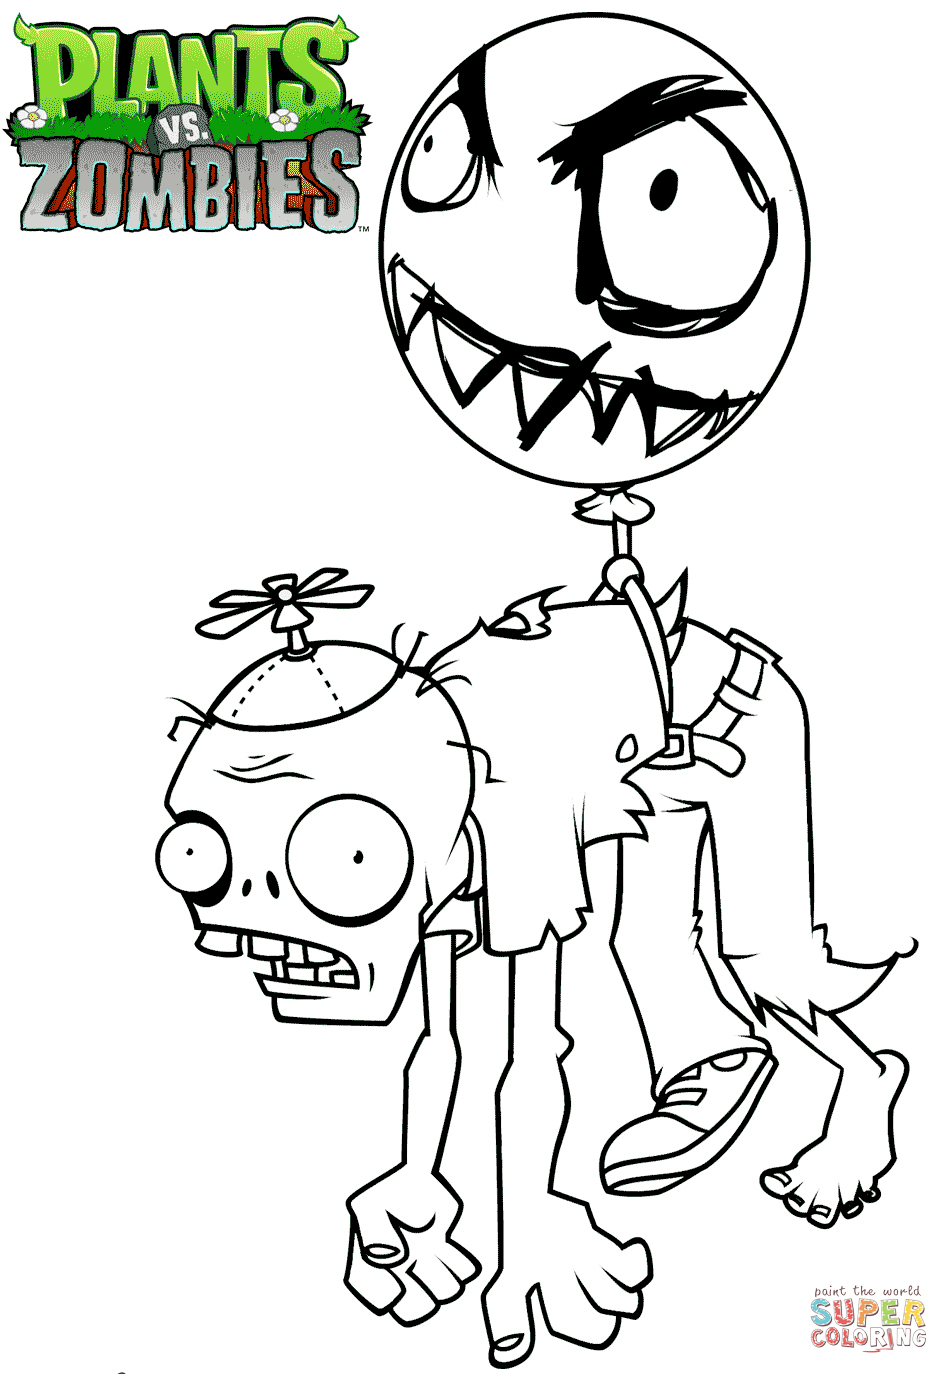 Plants vs zombies balloon zombie coloring page free printable coloring pages